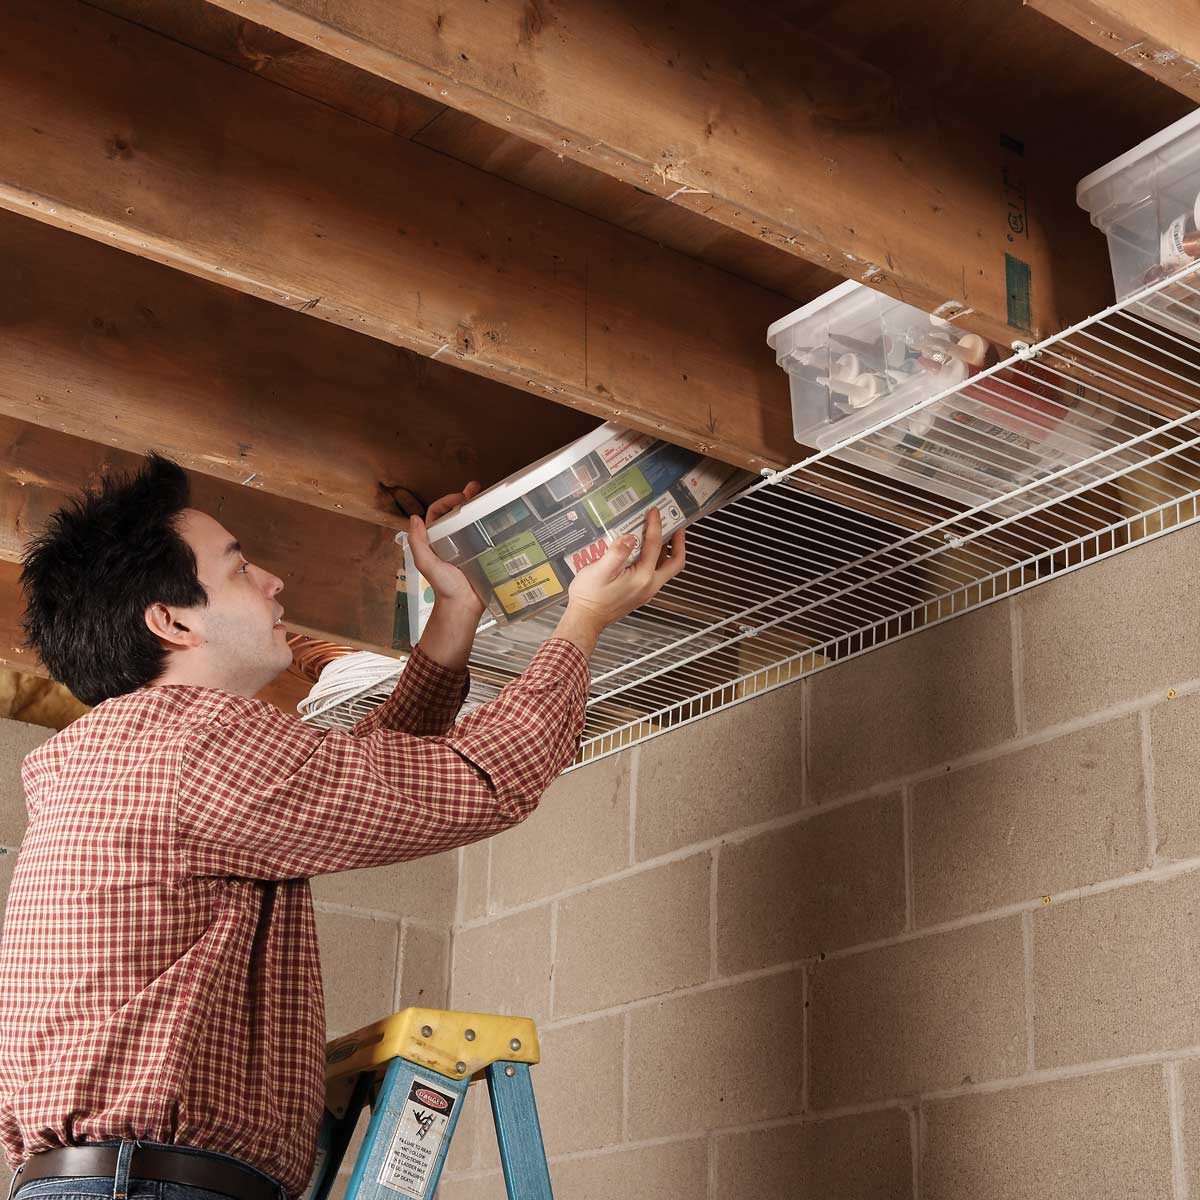 16 basement storage ideas to make the most of your unused space